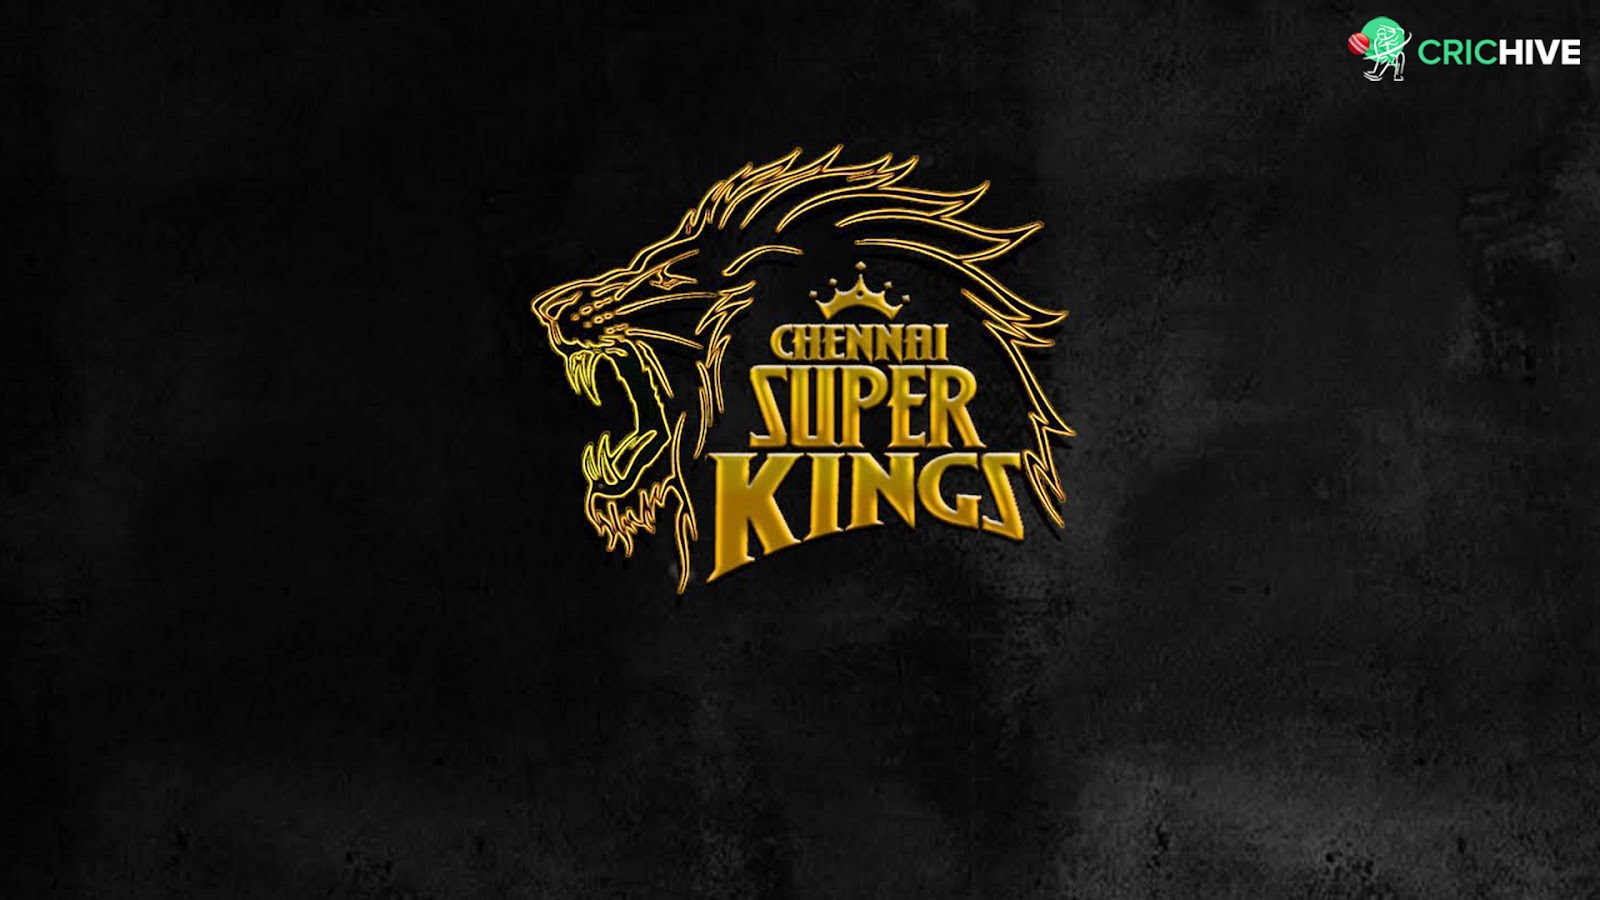 You Won't See CSK & Rajasthan Royals Play For The Next 2 Years. Owners